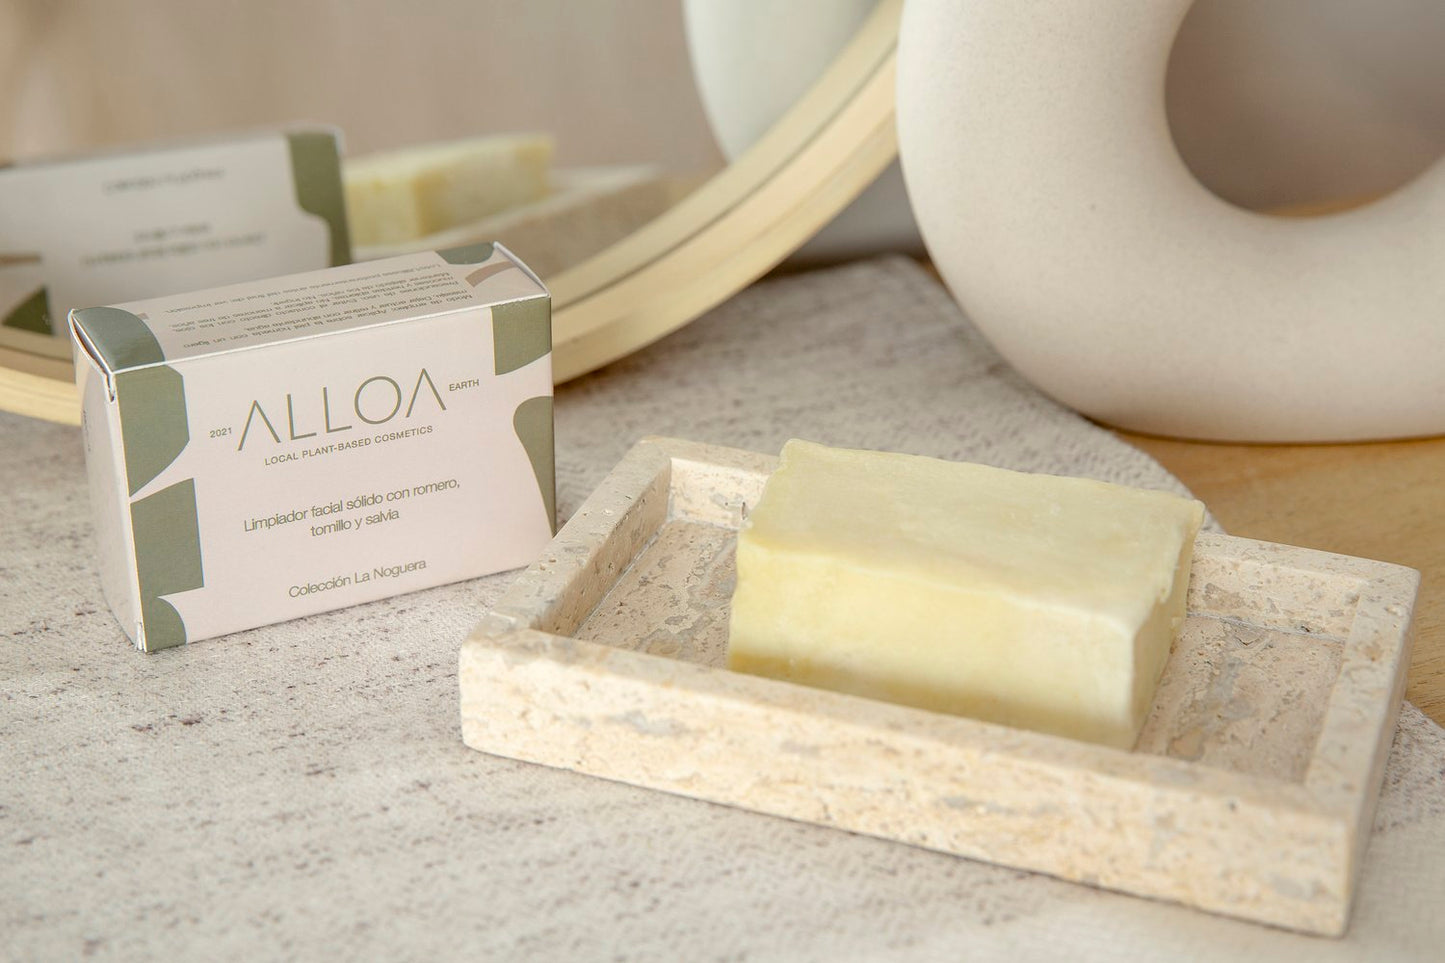 Solid facial cleanser bar